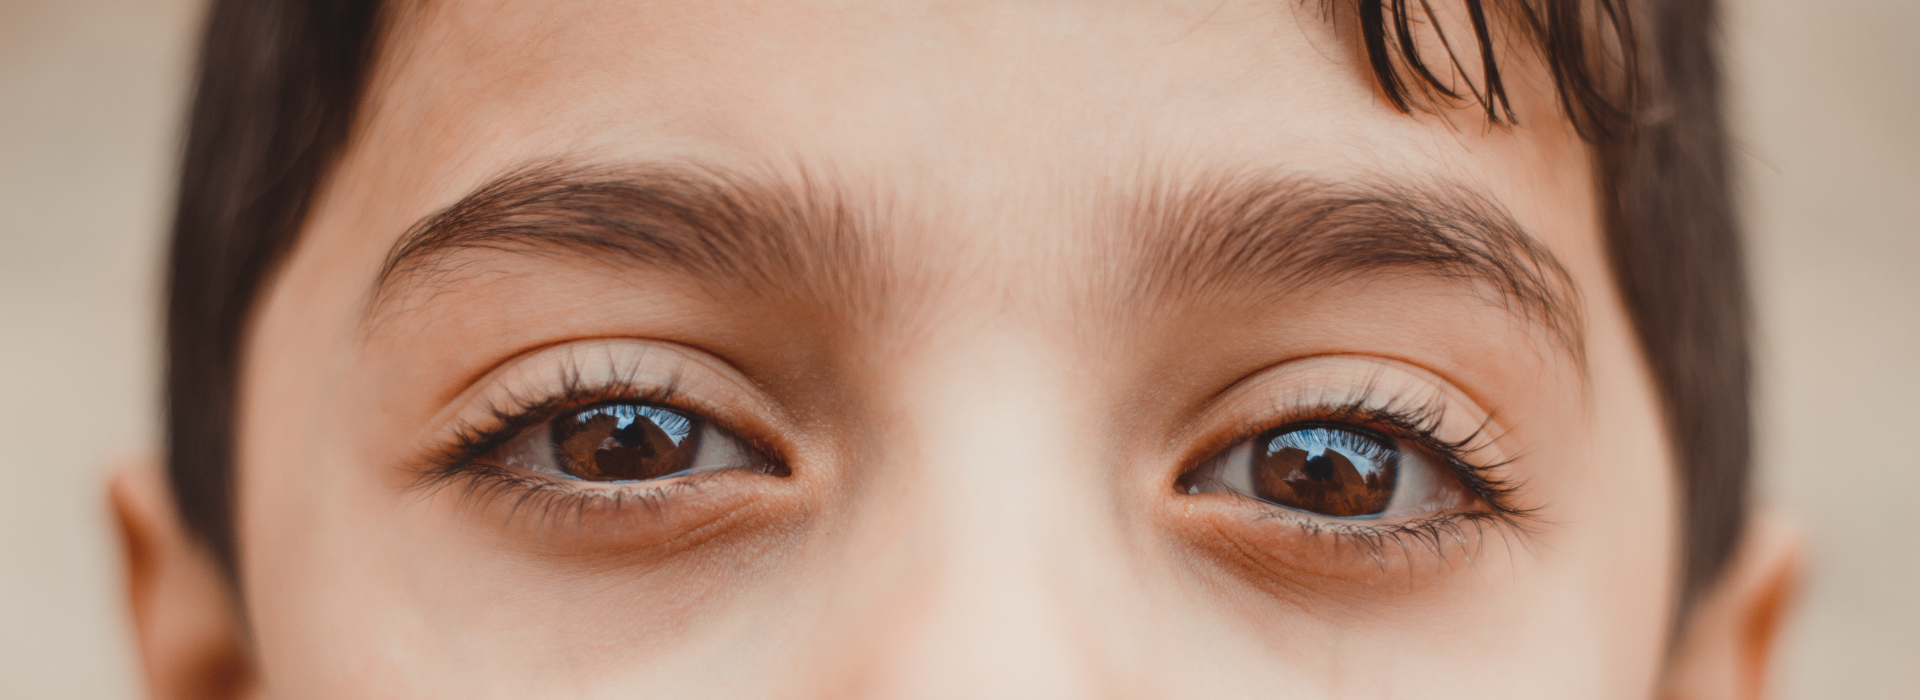 The Critical Importance of Protecting Children's Eyes from UV Radiation